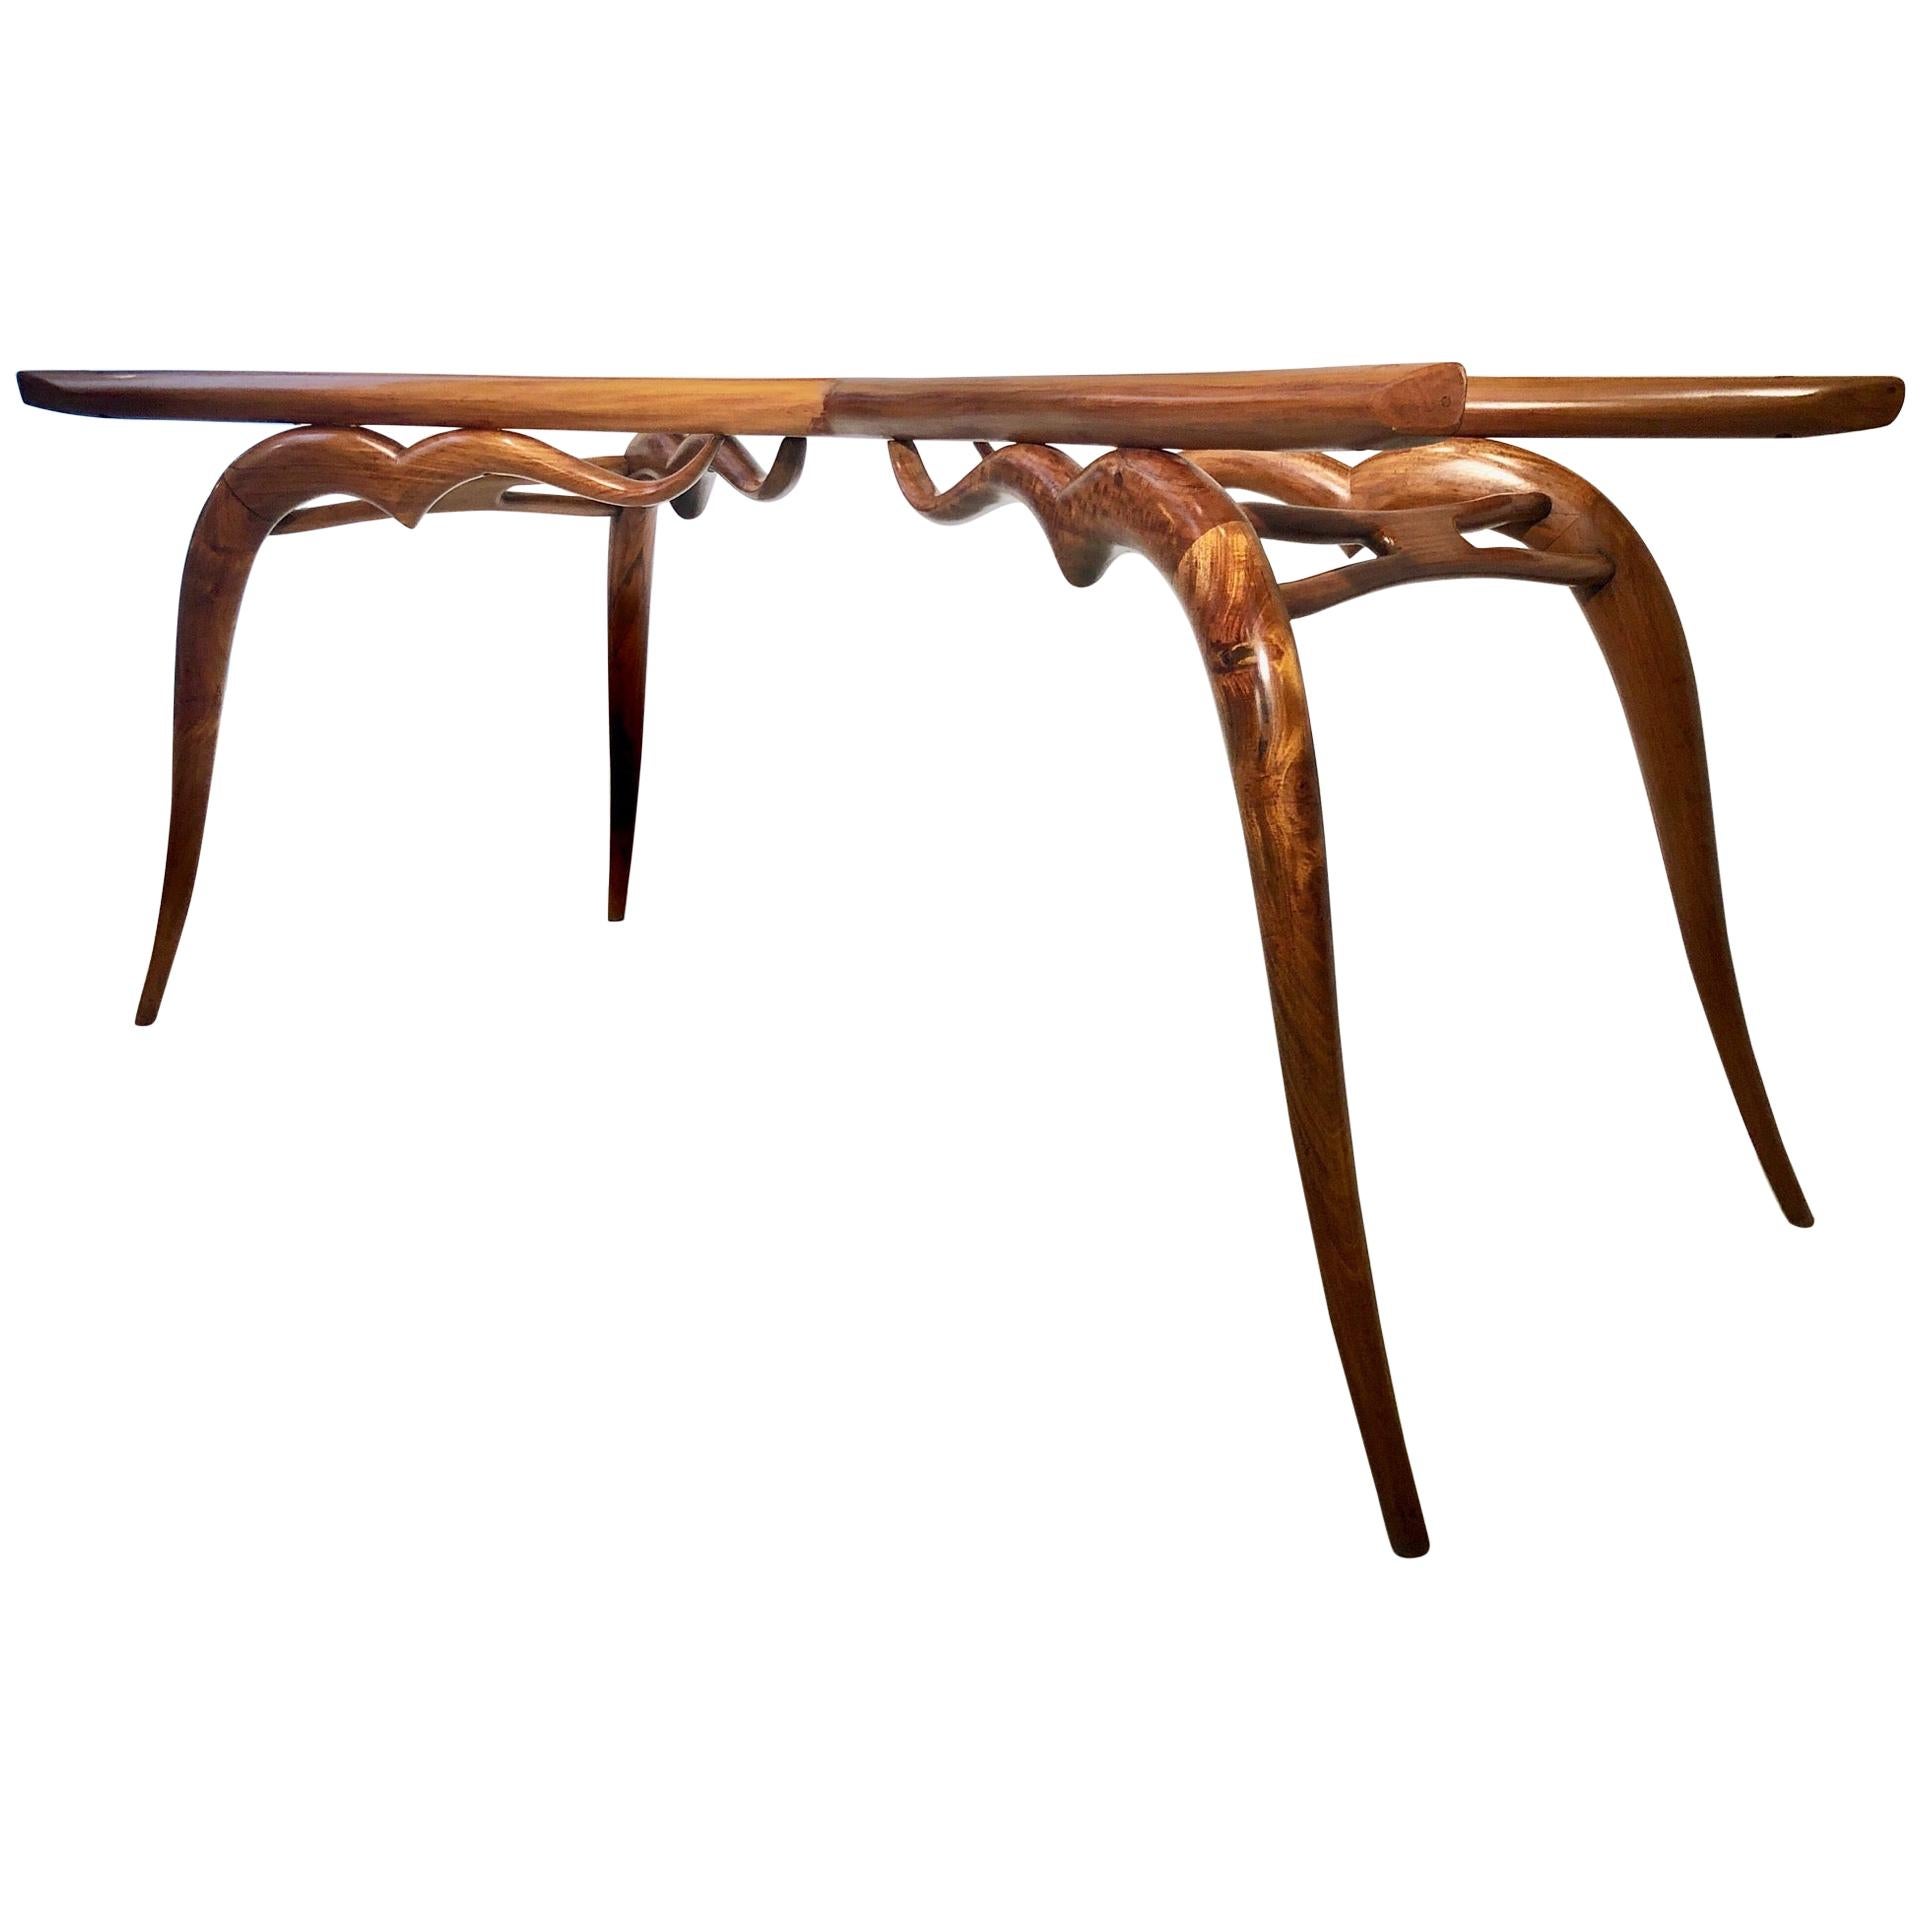 Giuseppe Scapinelli, Brazilian Modernist Dining Table Made with Solid Caviuna